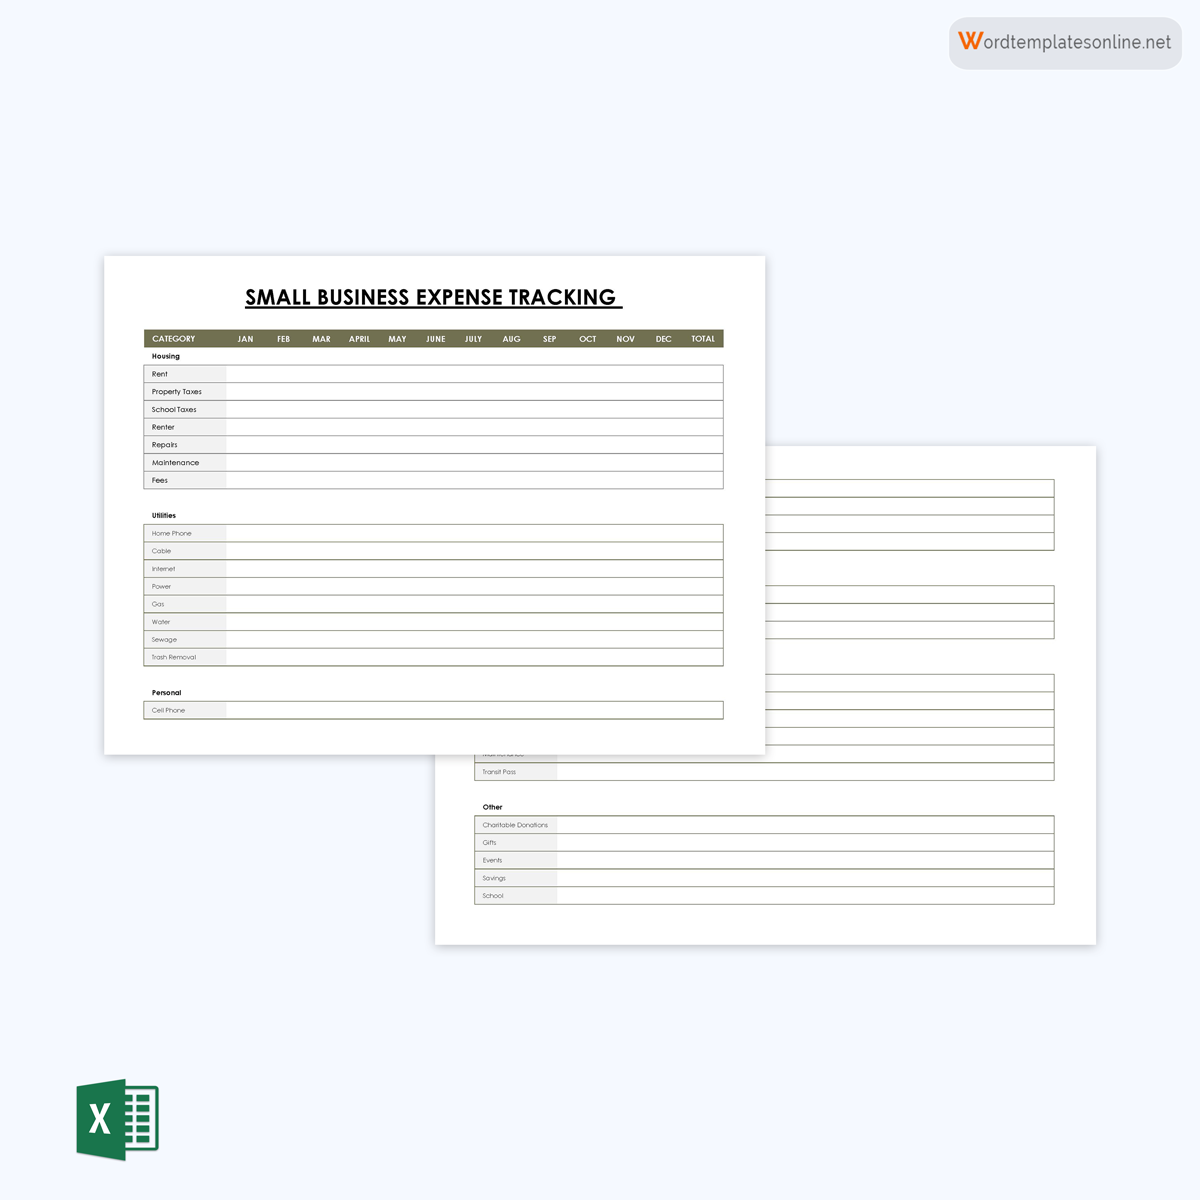 Free Printable Small Business Expense Tracking Report Template 03 as Excel Format